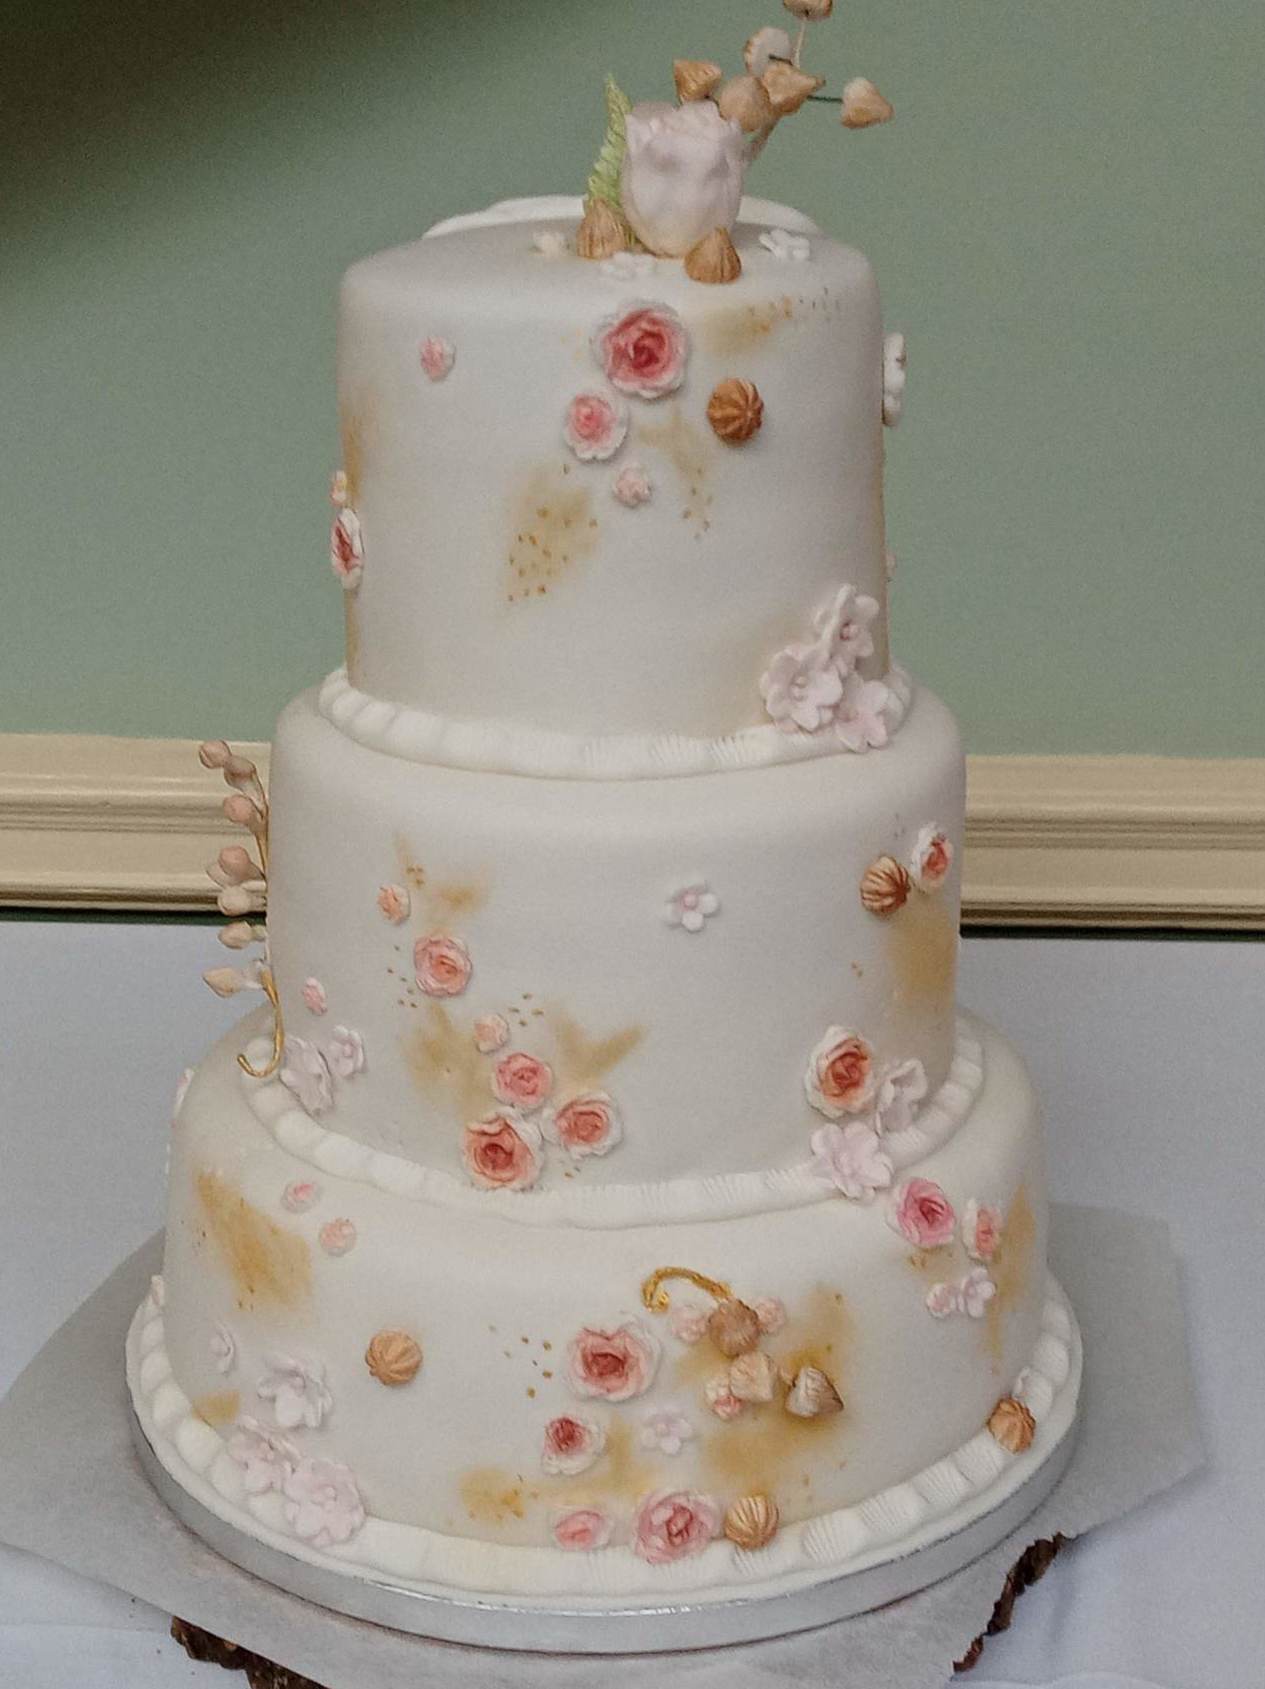 "His and Hers" wedding cake-front design